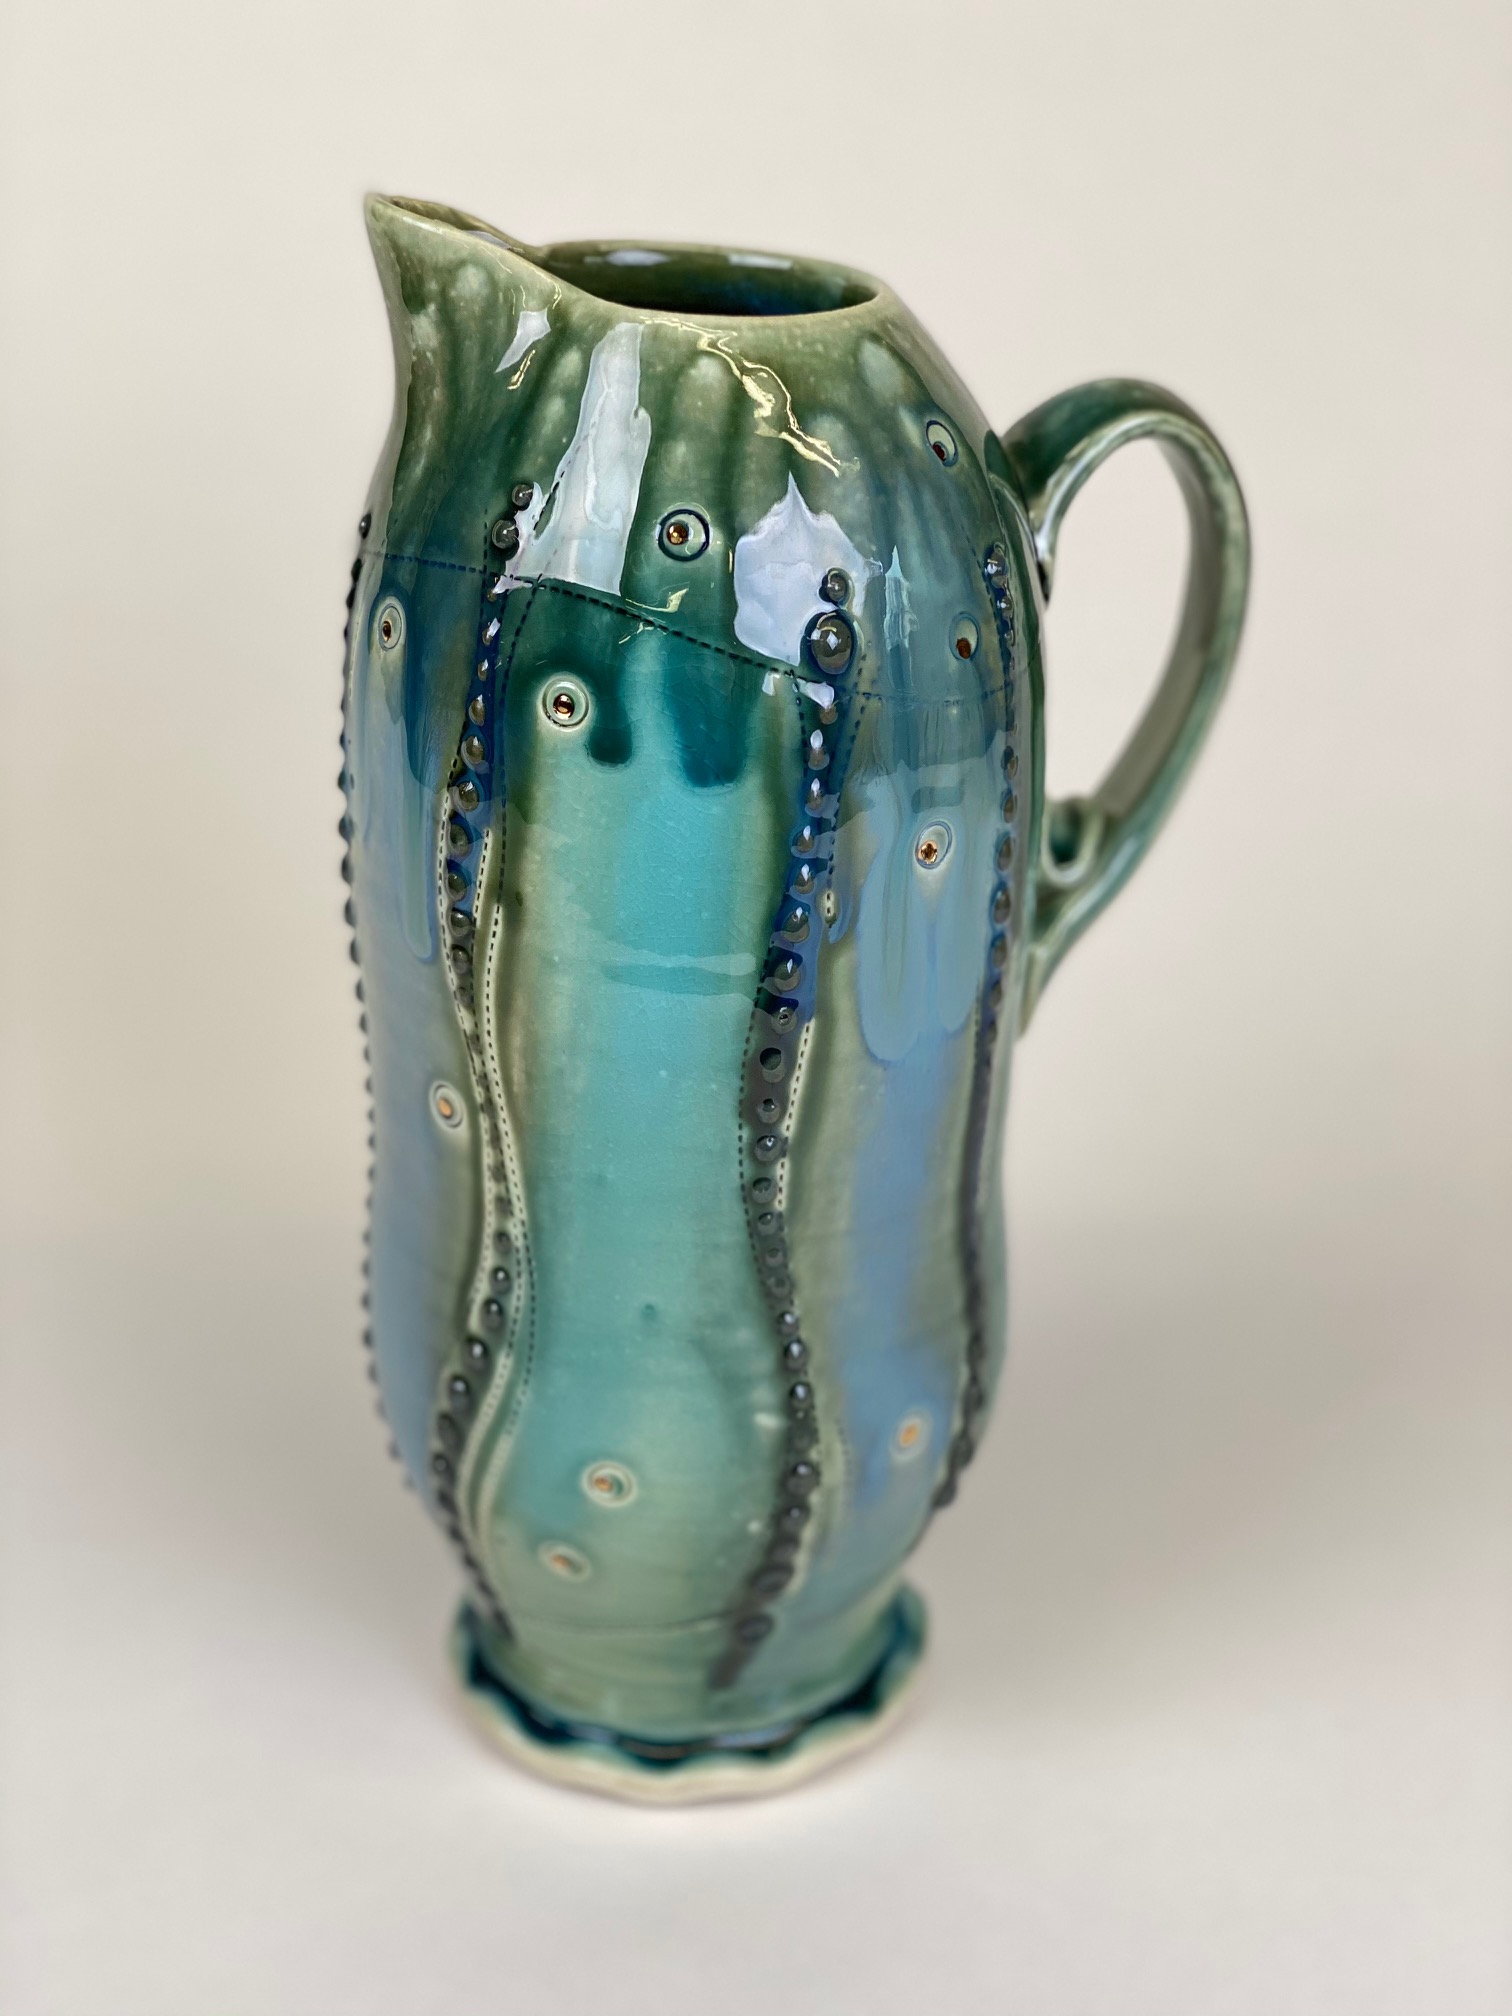 Michael D. Lemke’s pitcher, 16 in. (41 cm) in height, wheel-thrown porcelain, fired to cone 6 in oxidation, 2020.